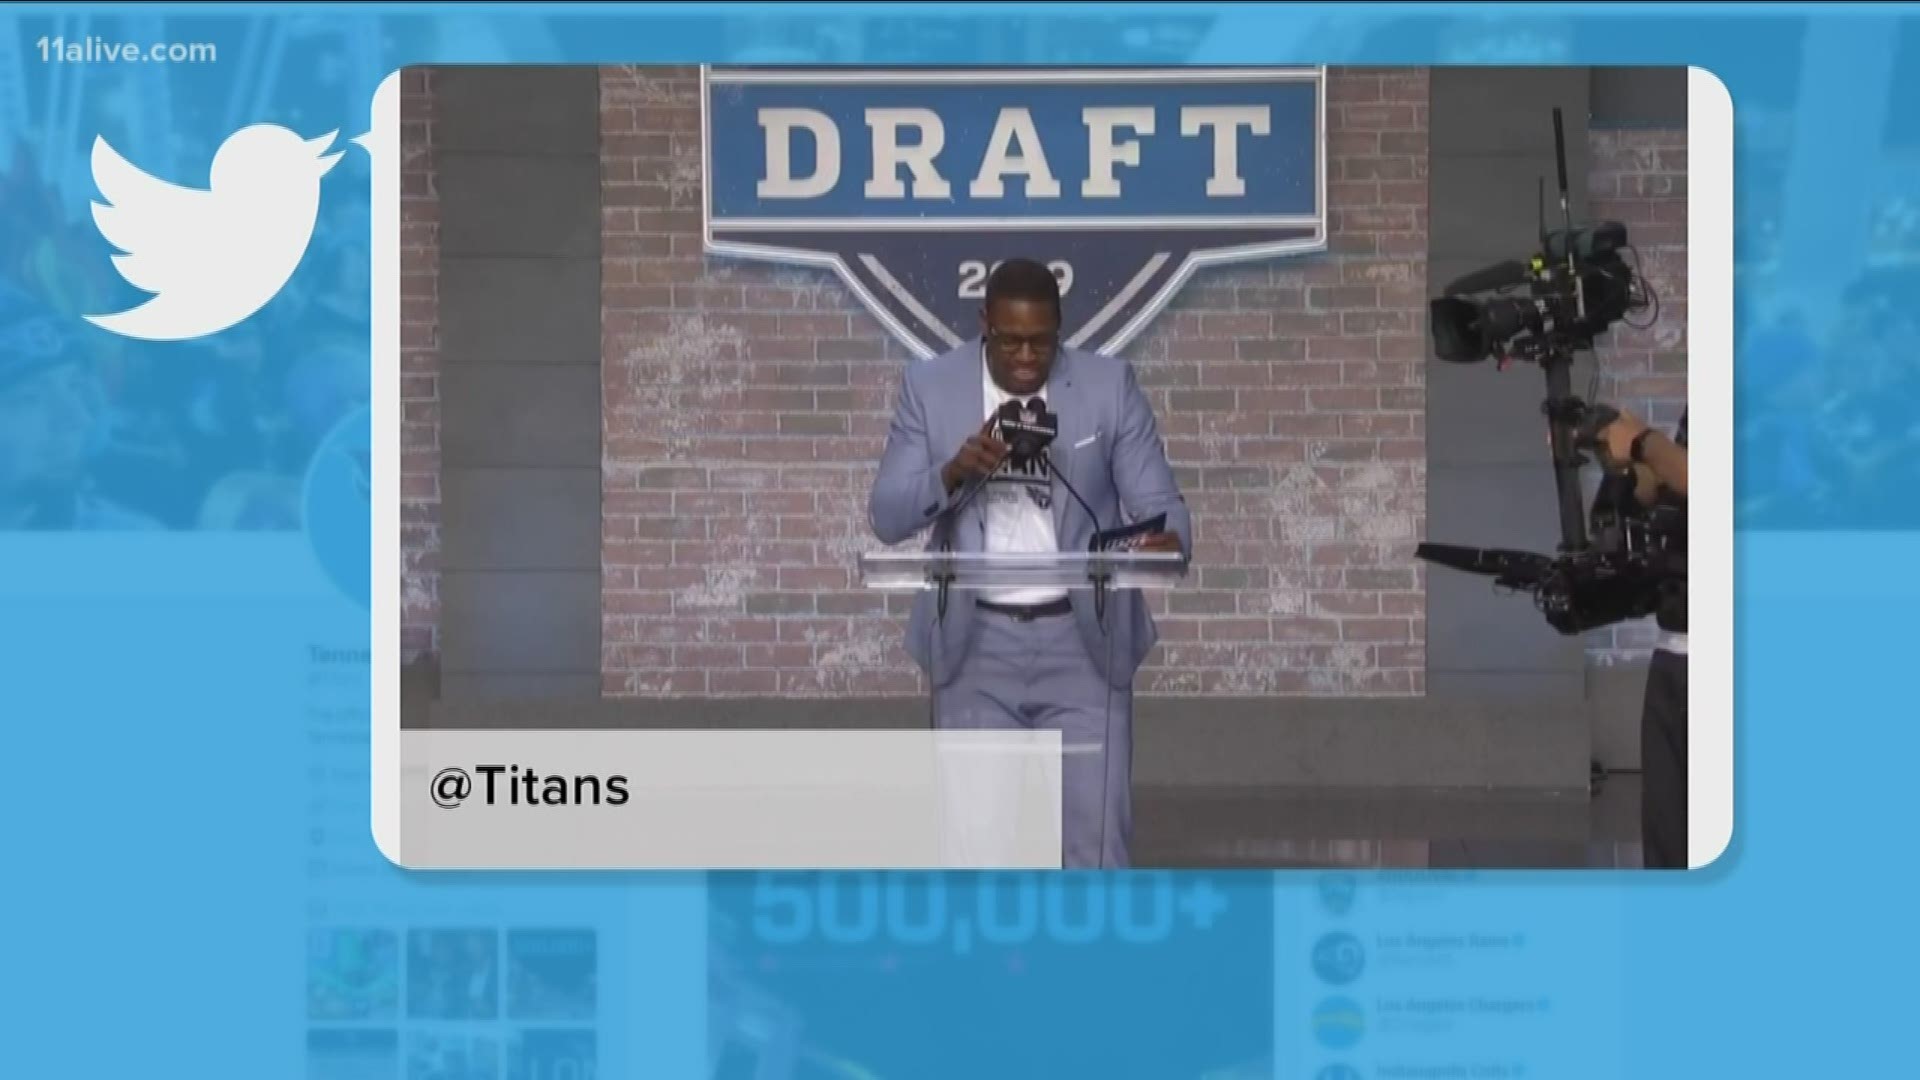 Abercrombie got the chance to announce his friend's name during the draft.